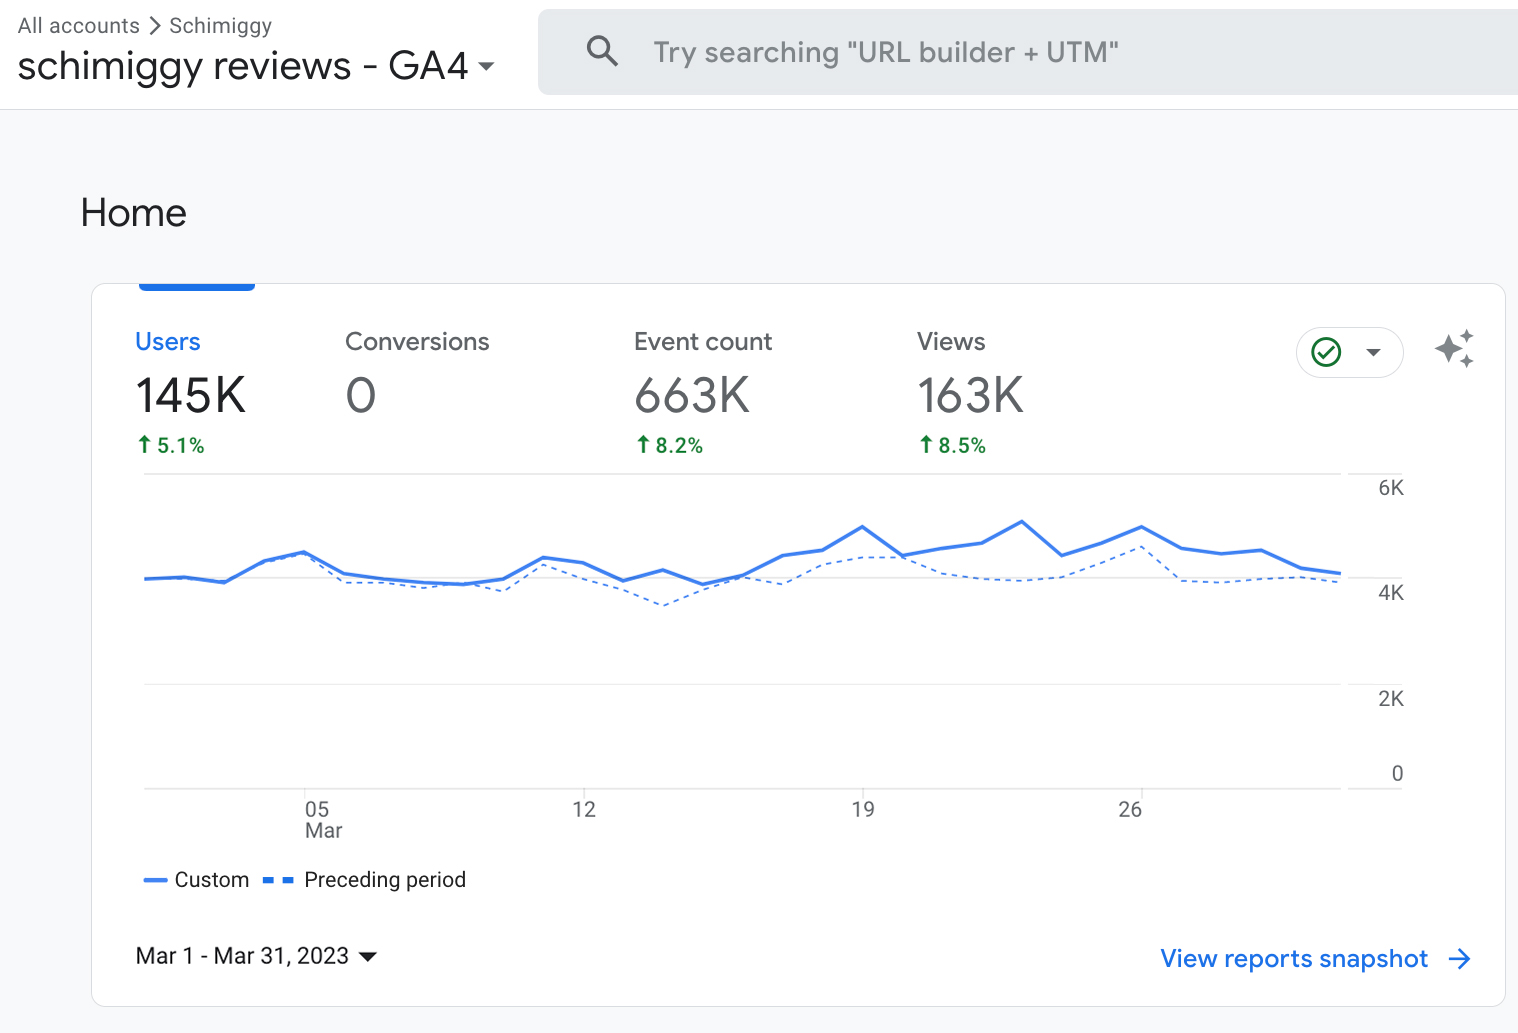 schimiggy reviews March 2023 google analytics visitors report